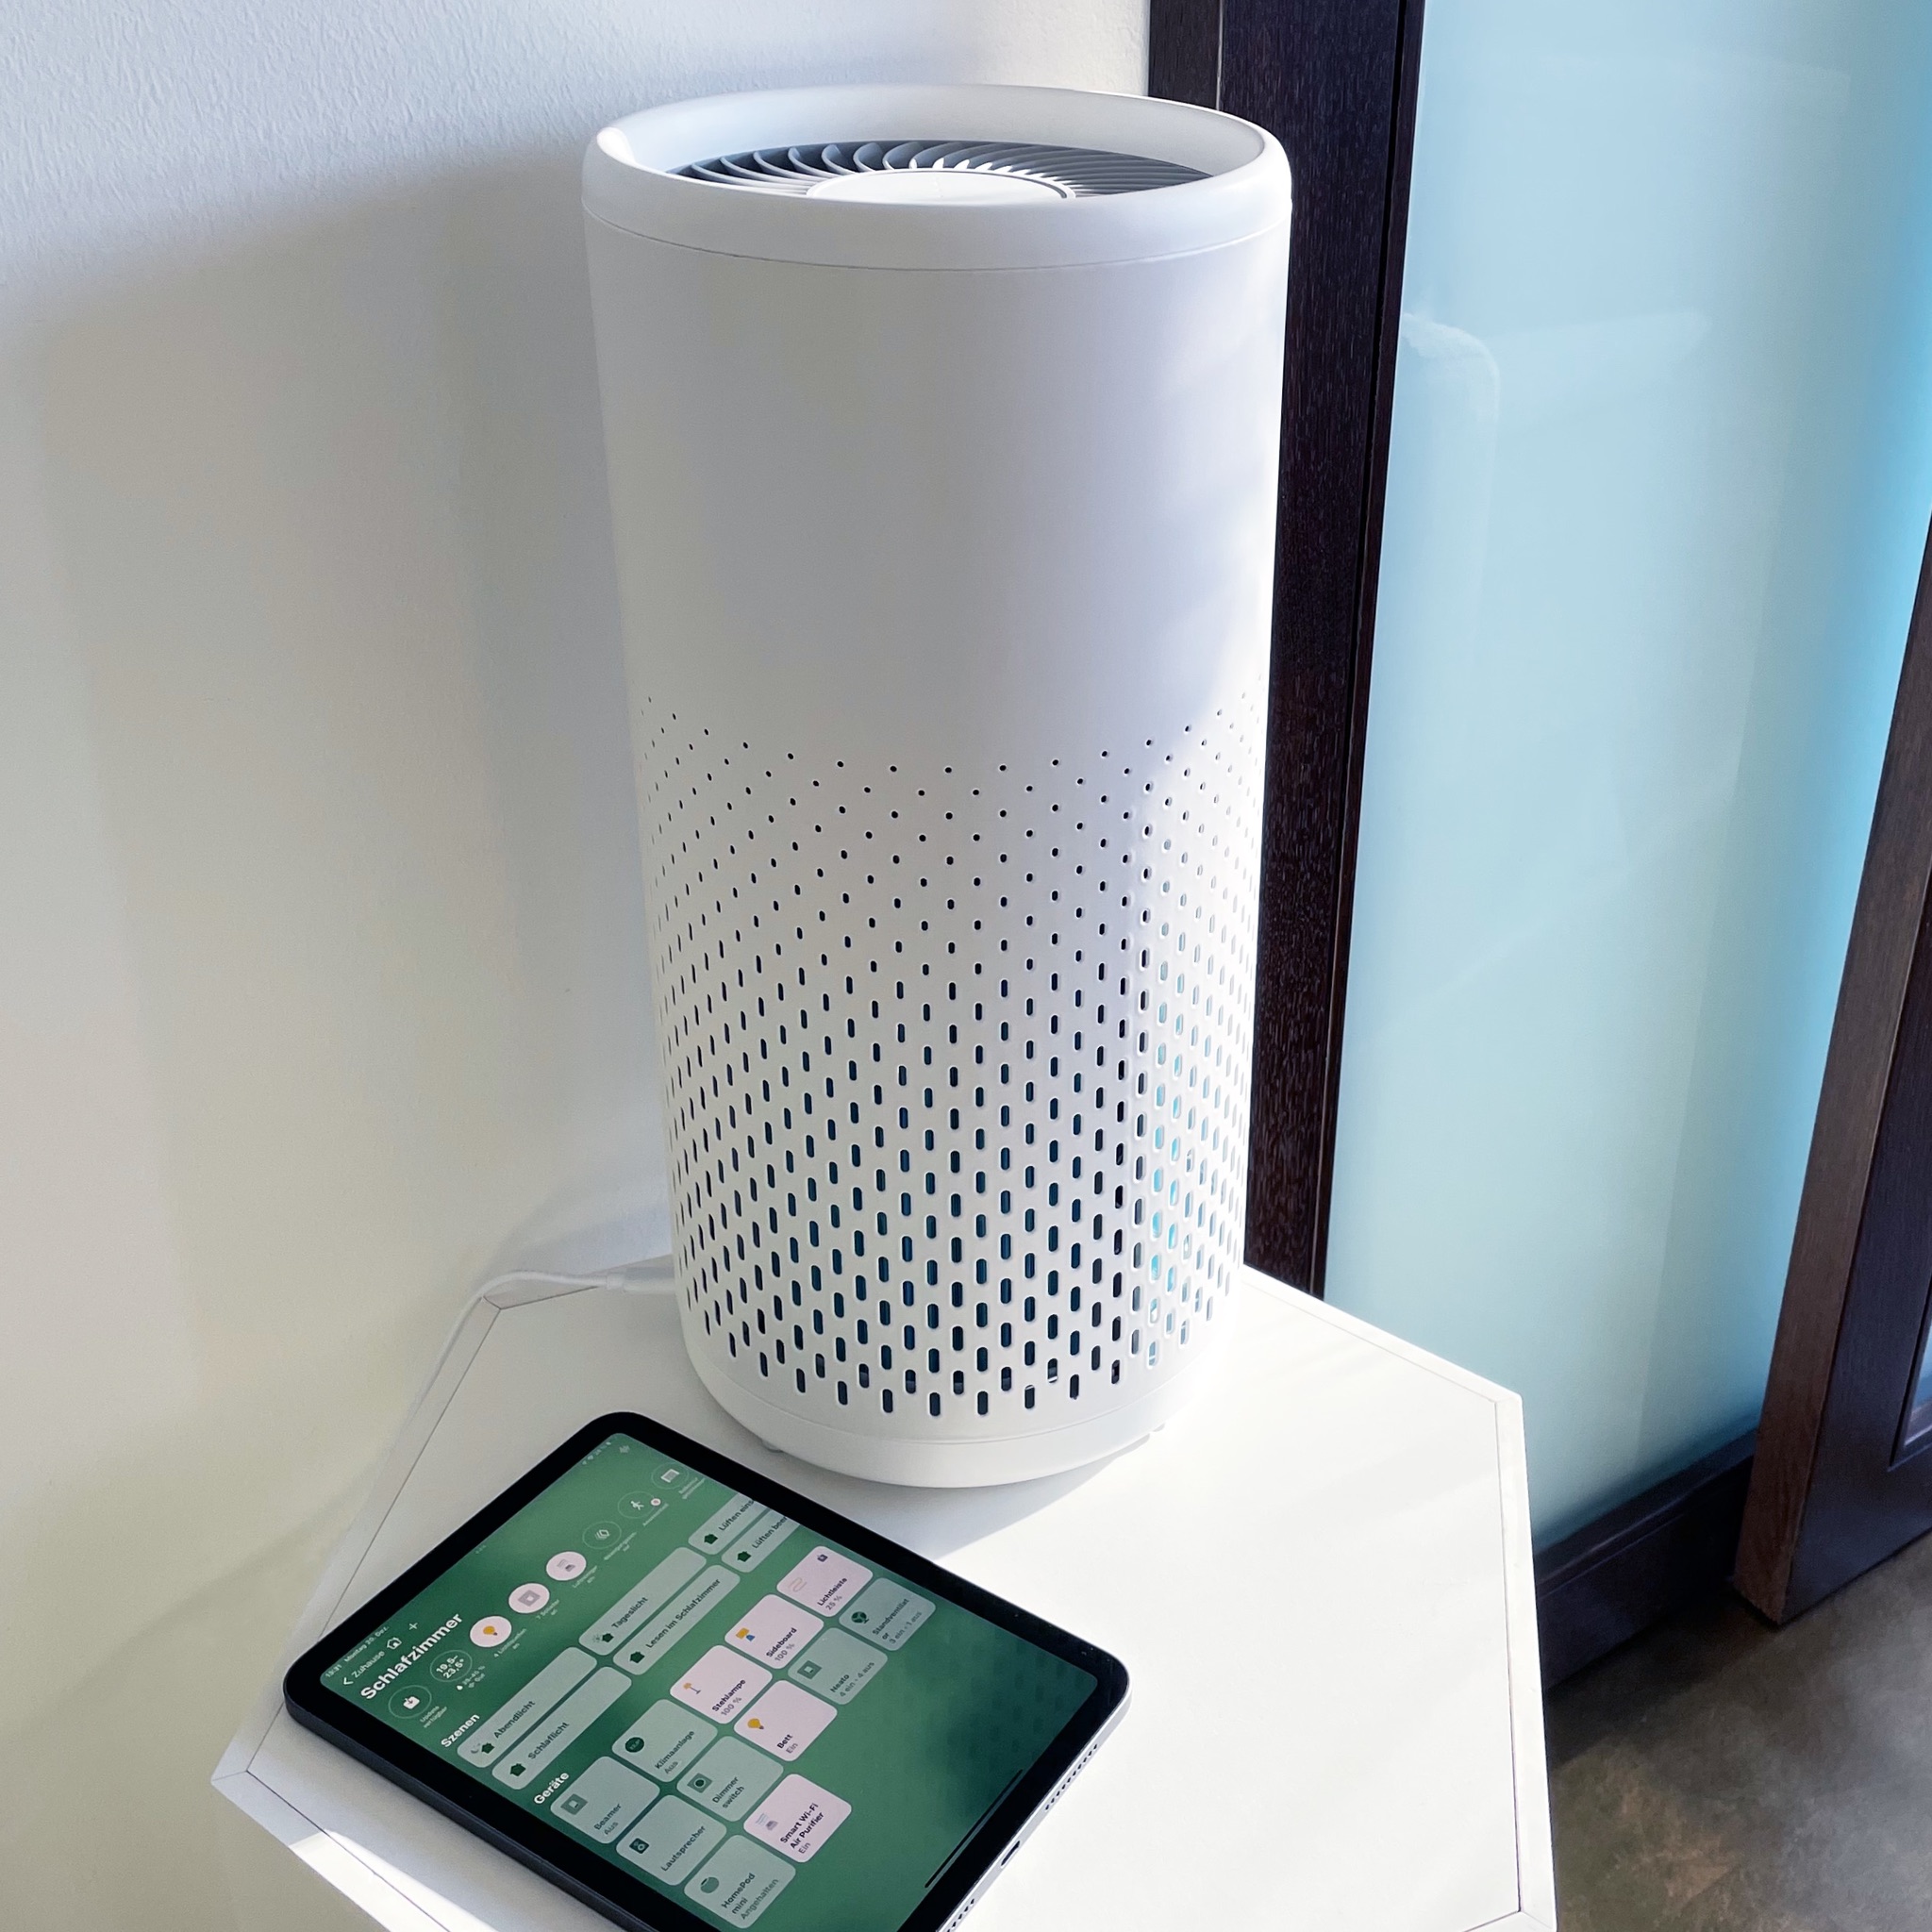 The Meross air purifier does one thing it purifies the